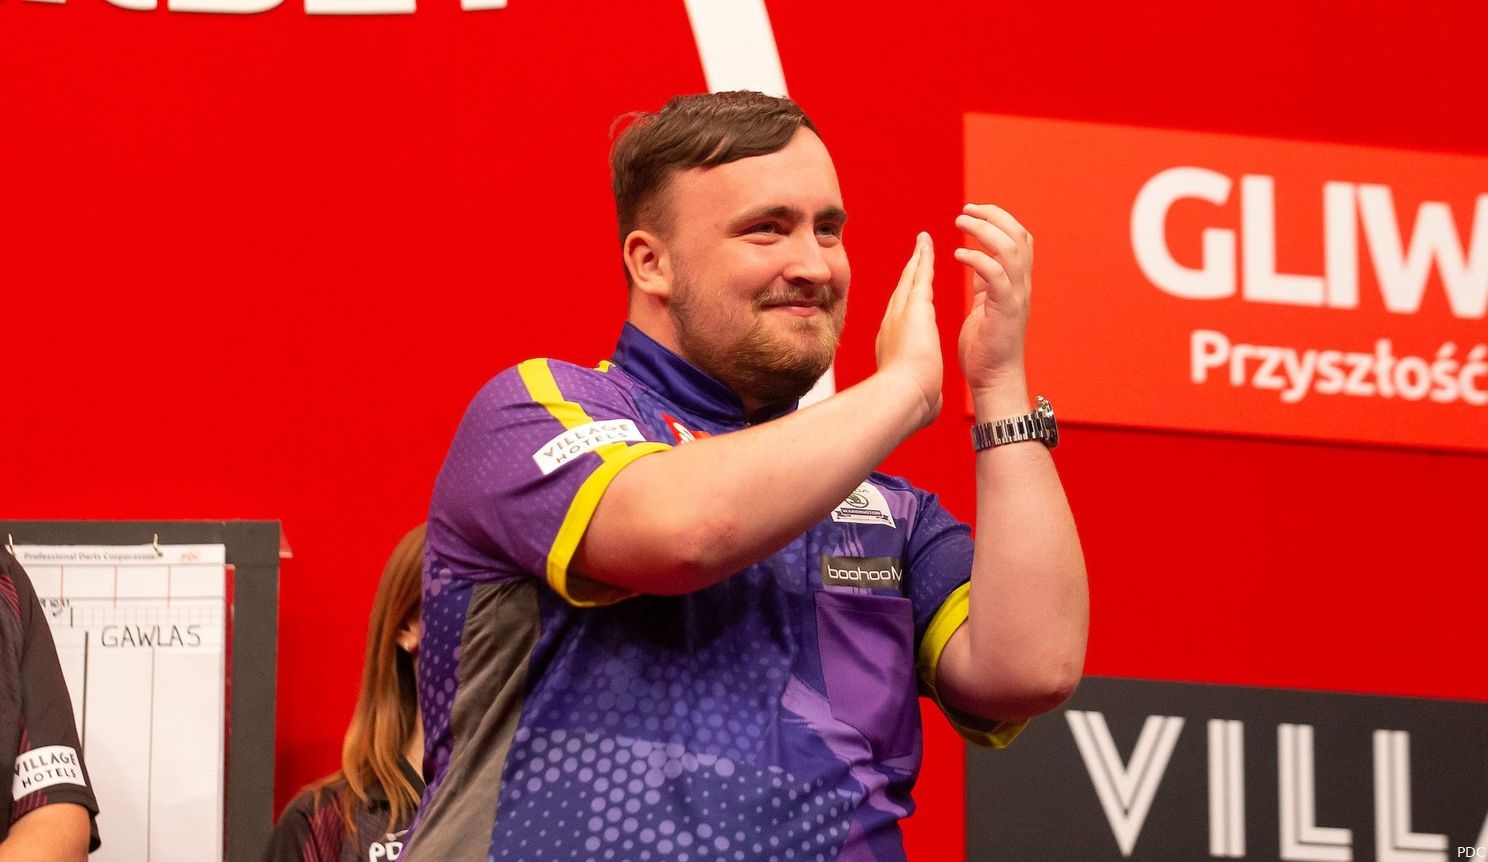 "A little bit of rust after my week away, but it was good to be back" - Luke Littler makes winning return at Poland Darts Masters